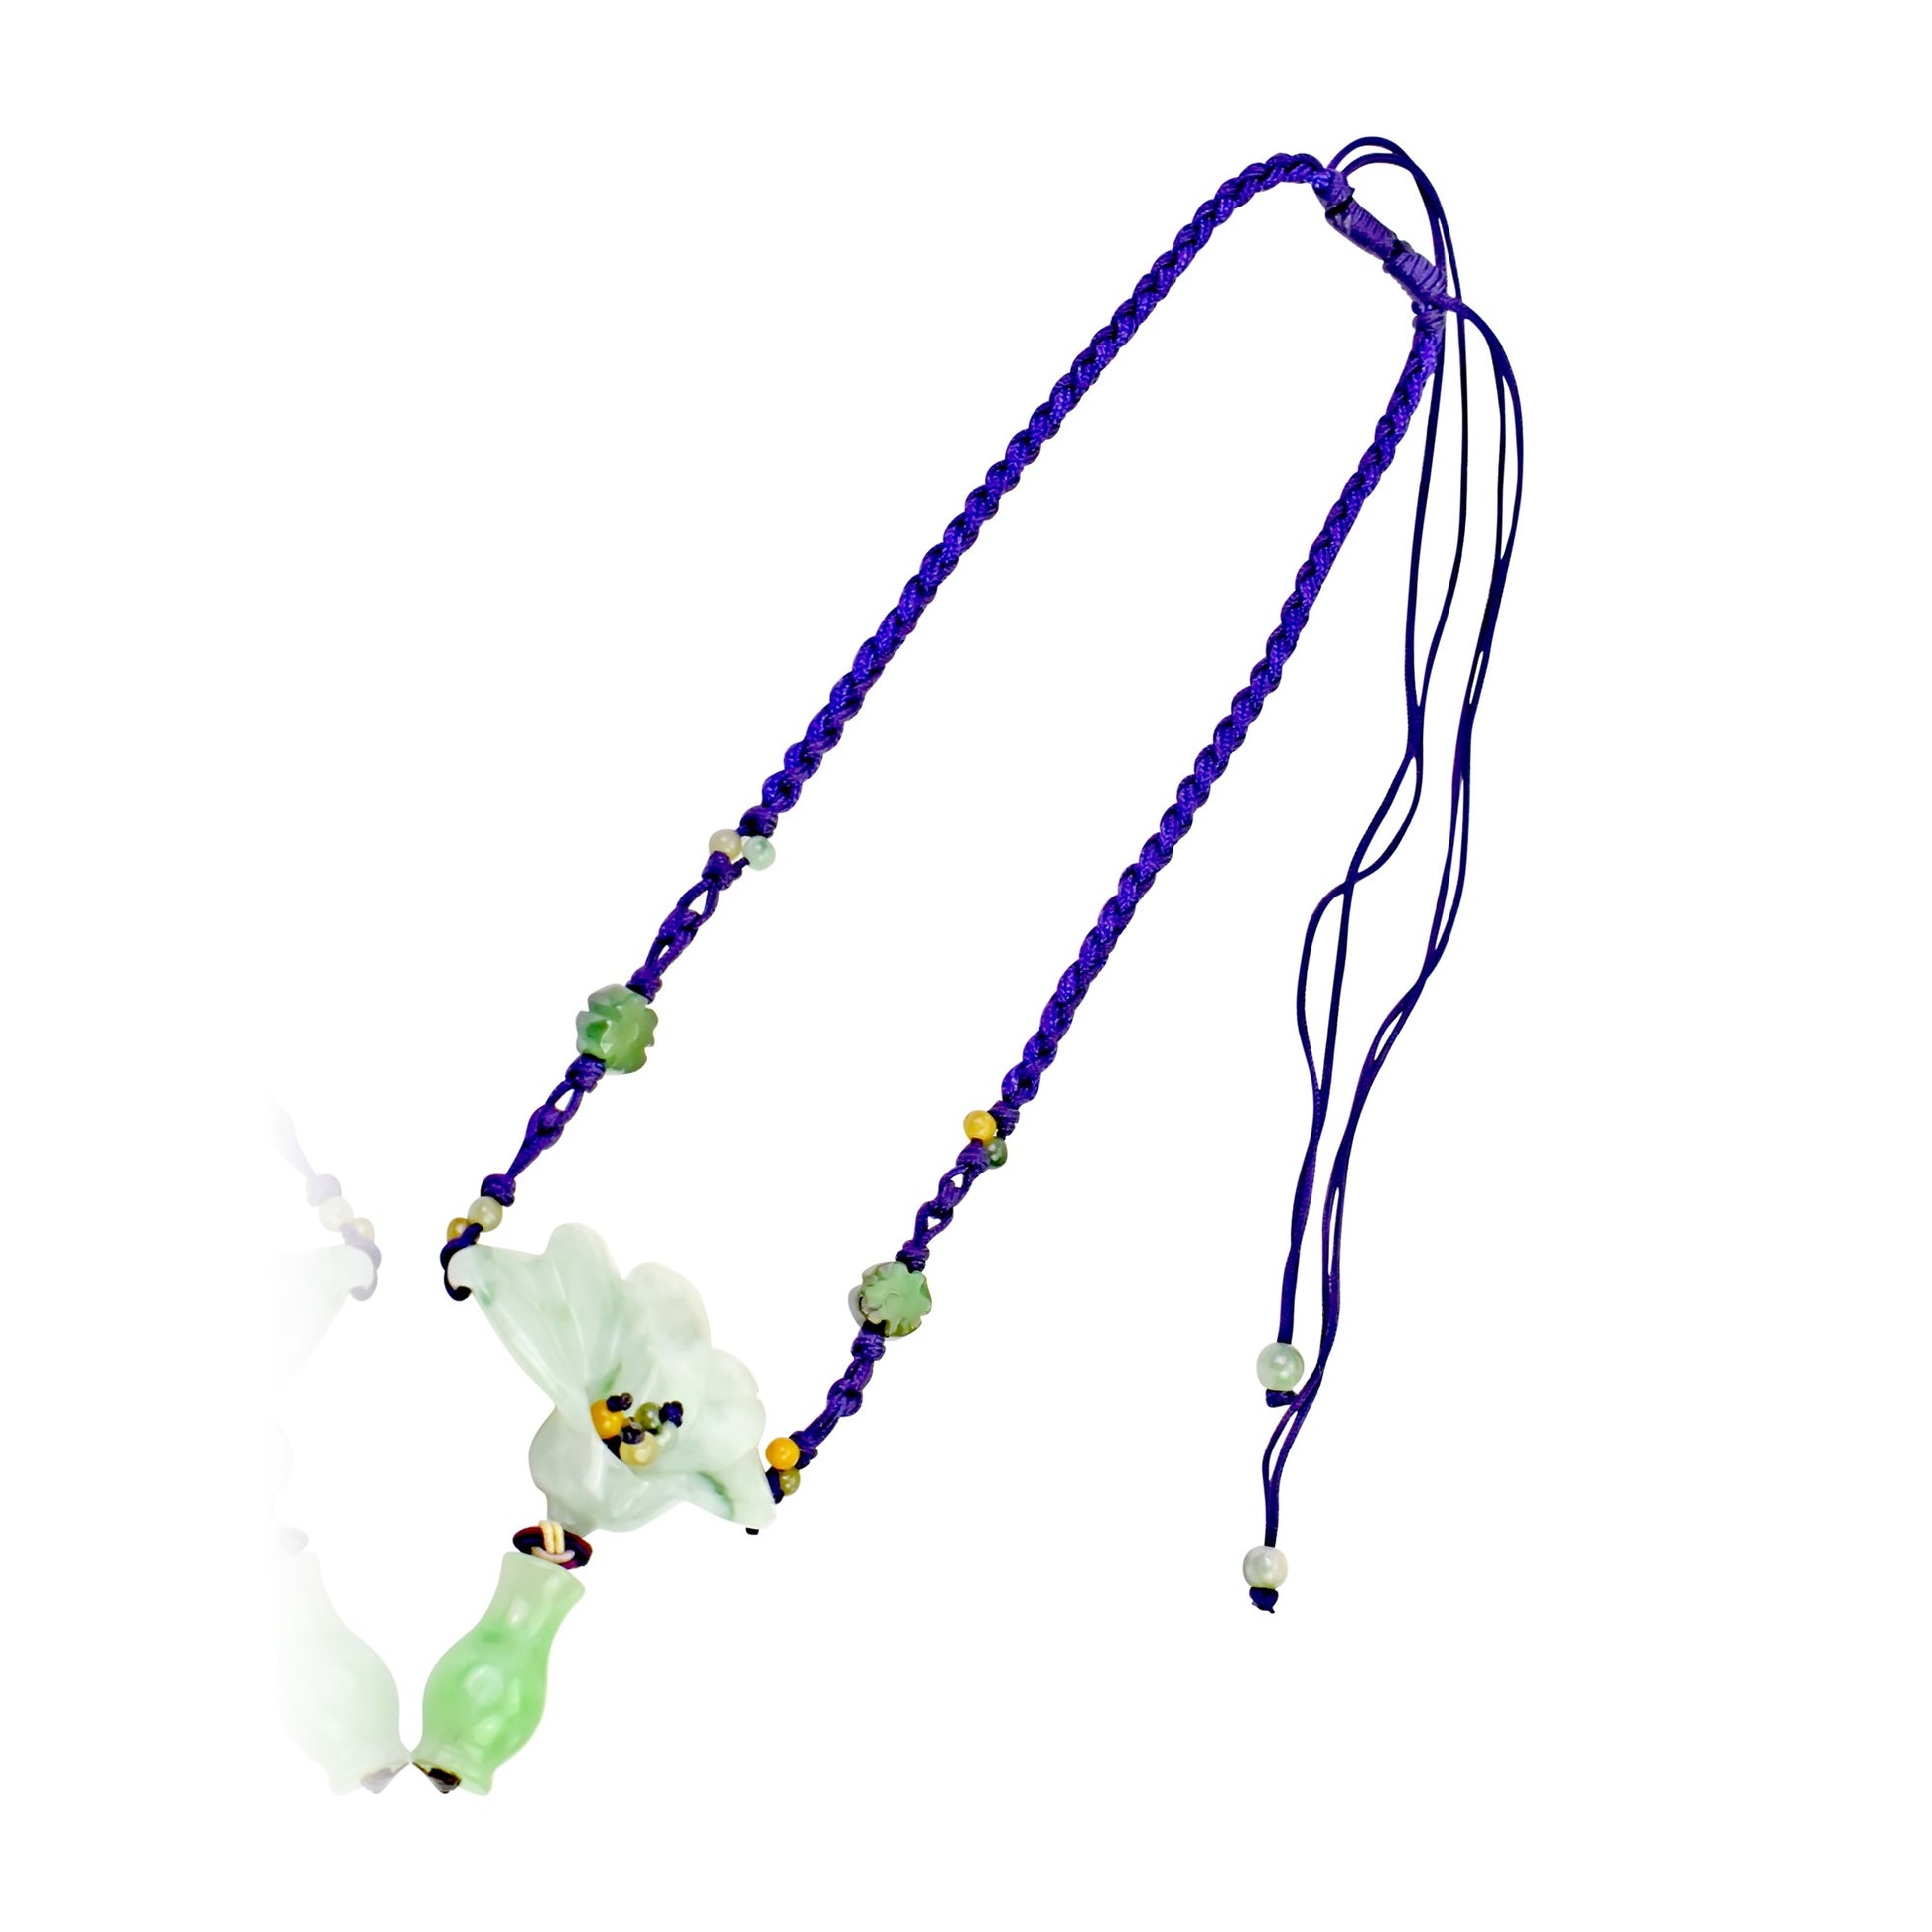 Achieve Beauty and Integrity with Peacock Flower Jade Necklace with Purple Cord